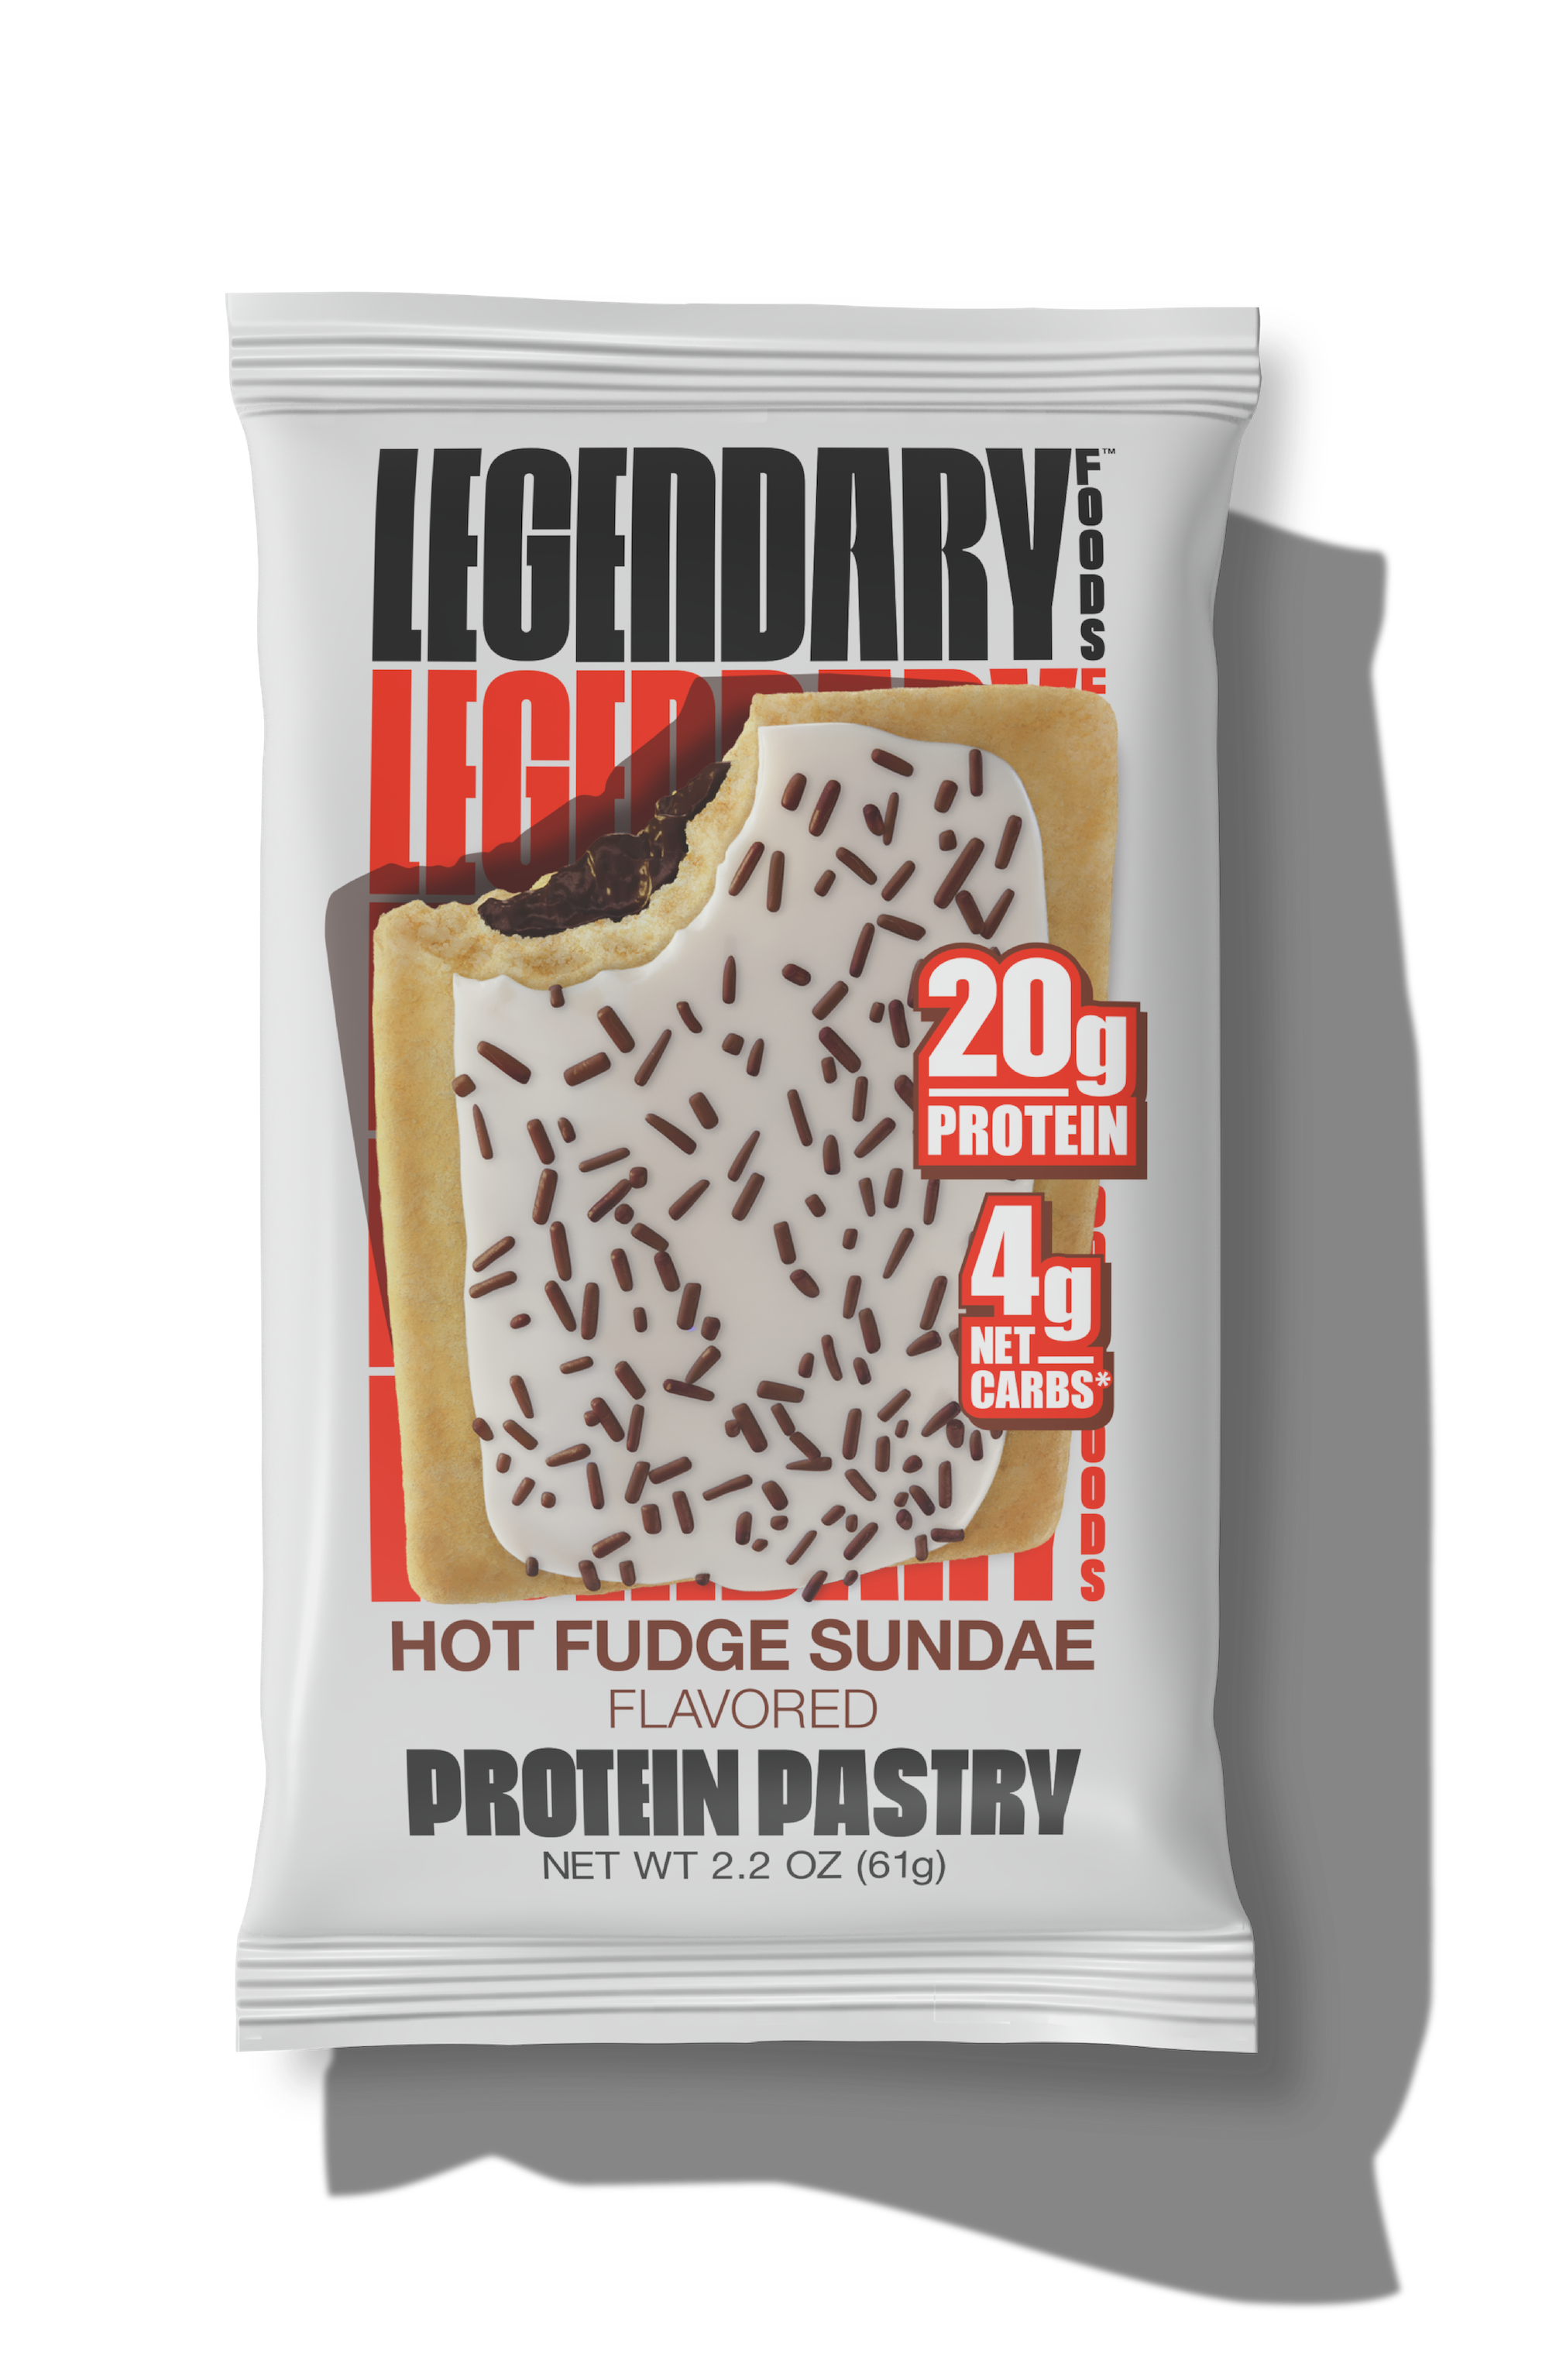 "Cake Style" Low-Carb Protein Pastry by Legendary Foods - Hot Fudge Sundae